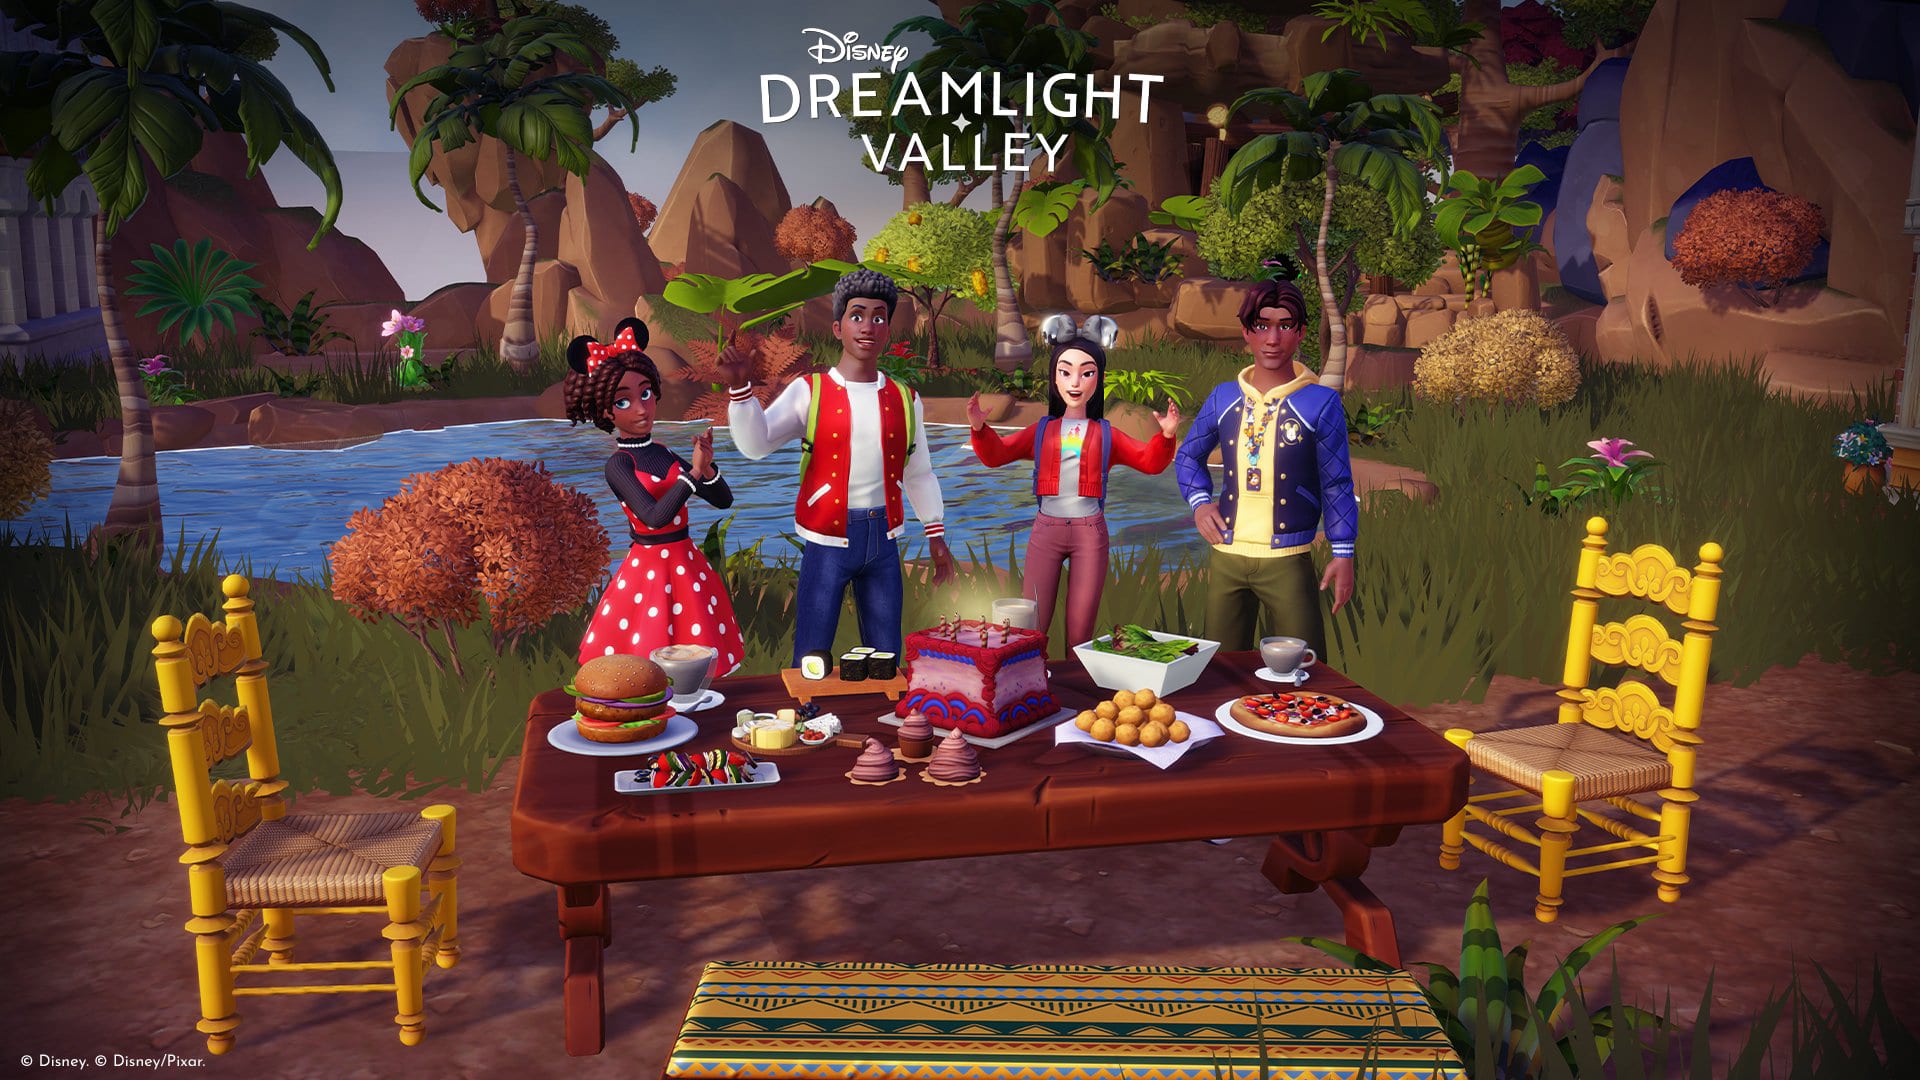 Disney Dreamlight Valley Update 1.85 Casts Out This December 13